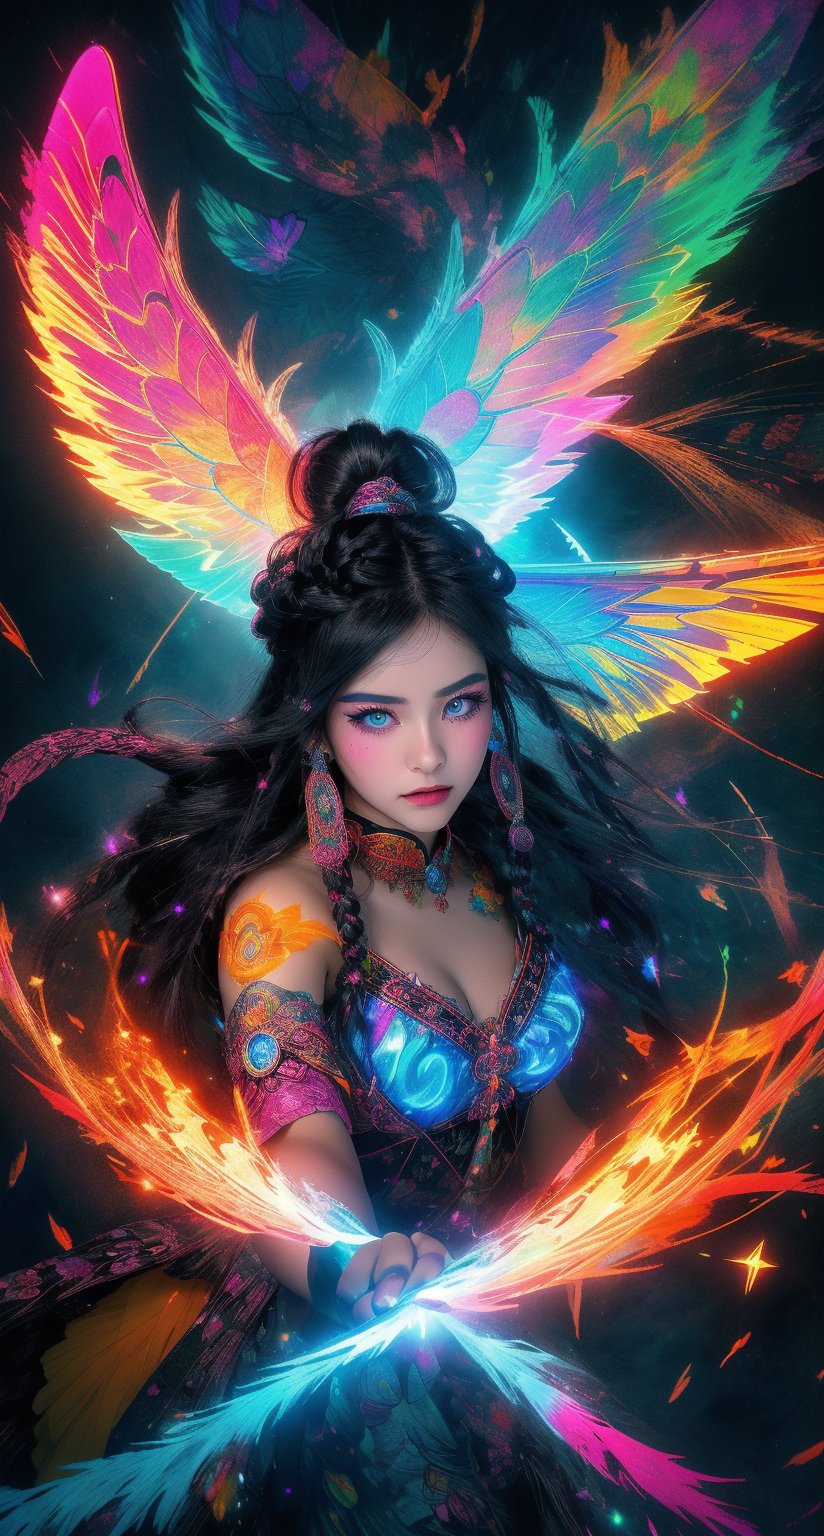 A vibrant anime-inspired scene unfolds: a teenage girl with long black hair styled in intricate braids sits amidst elemental elements - swirling clouds of misty gray and wispy tendrils of fiery orange. Her bright light blue eyes sparkle like stars as she gazes intently at the delicate butterfly perched on her outstretched hand, its iridescent wings shimmering in harmony with her own fiery aura. The ringmaster's top hat and colorful costume lie discarded nearby, a testament to the whimsical energy of this mystical realm.,midjourney